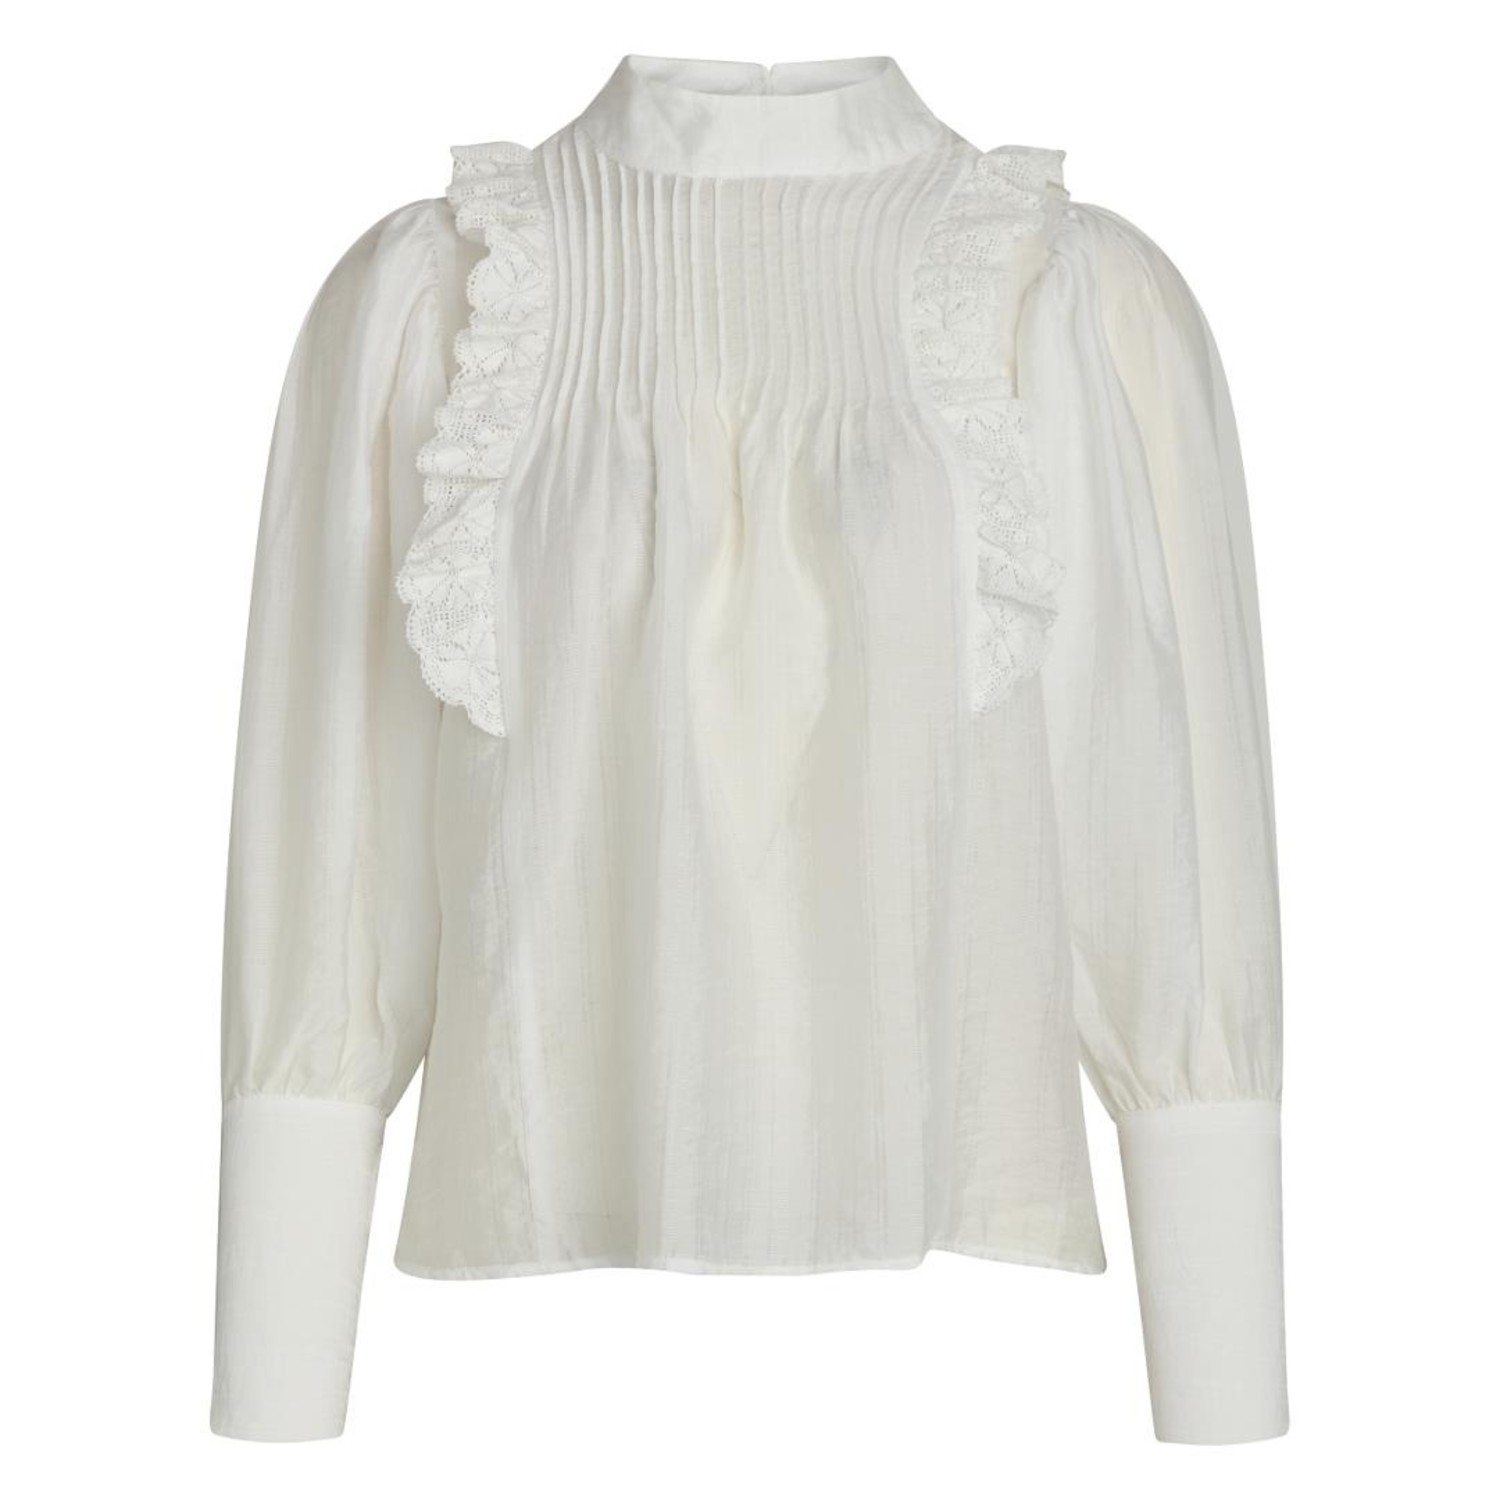 AUGUST VIA COSTES frill blouse - レディース